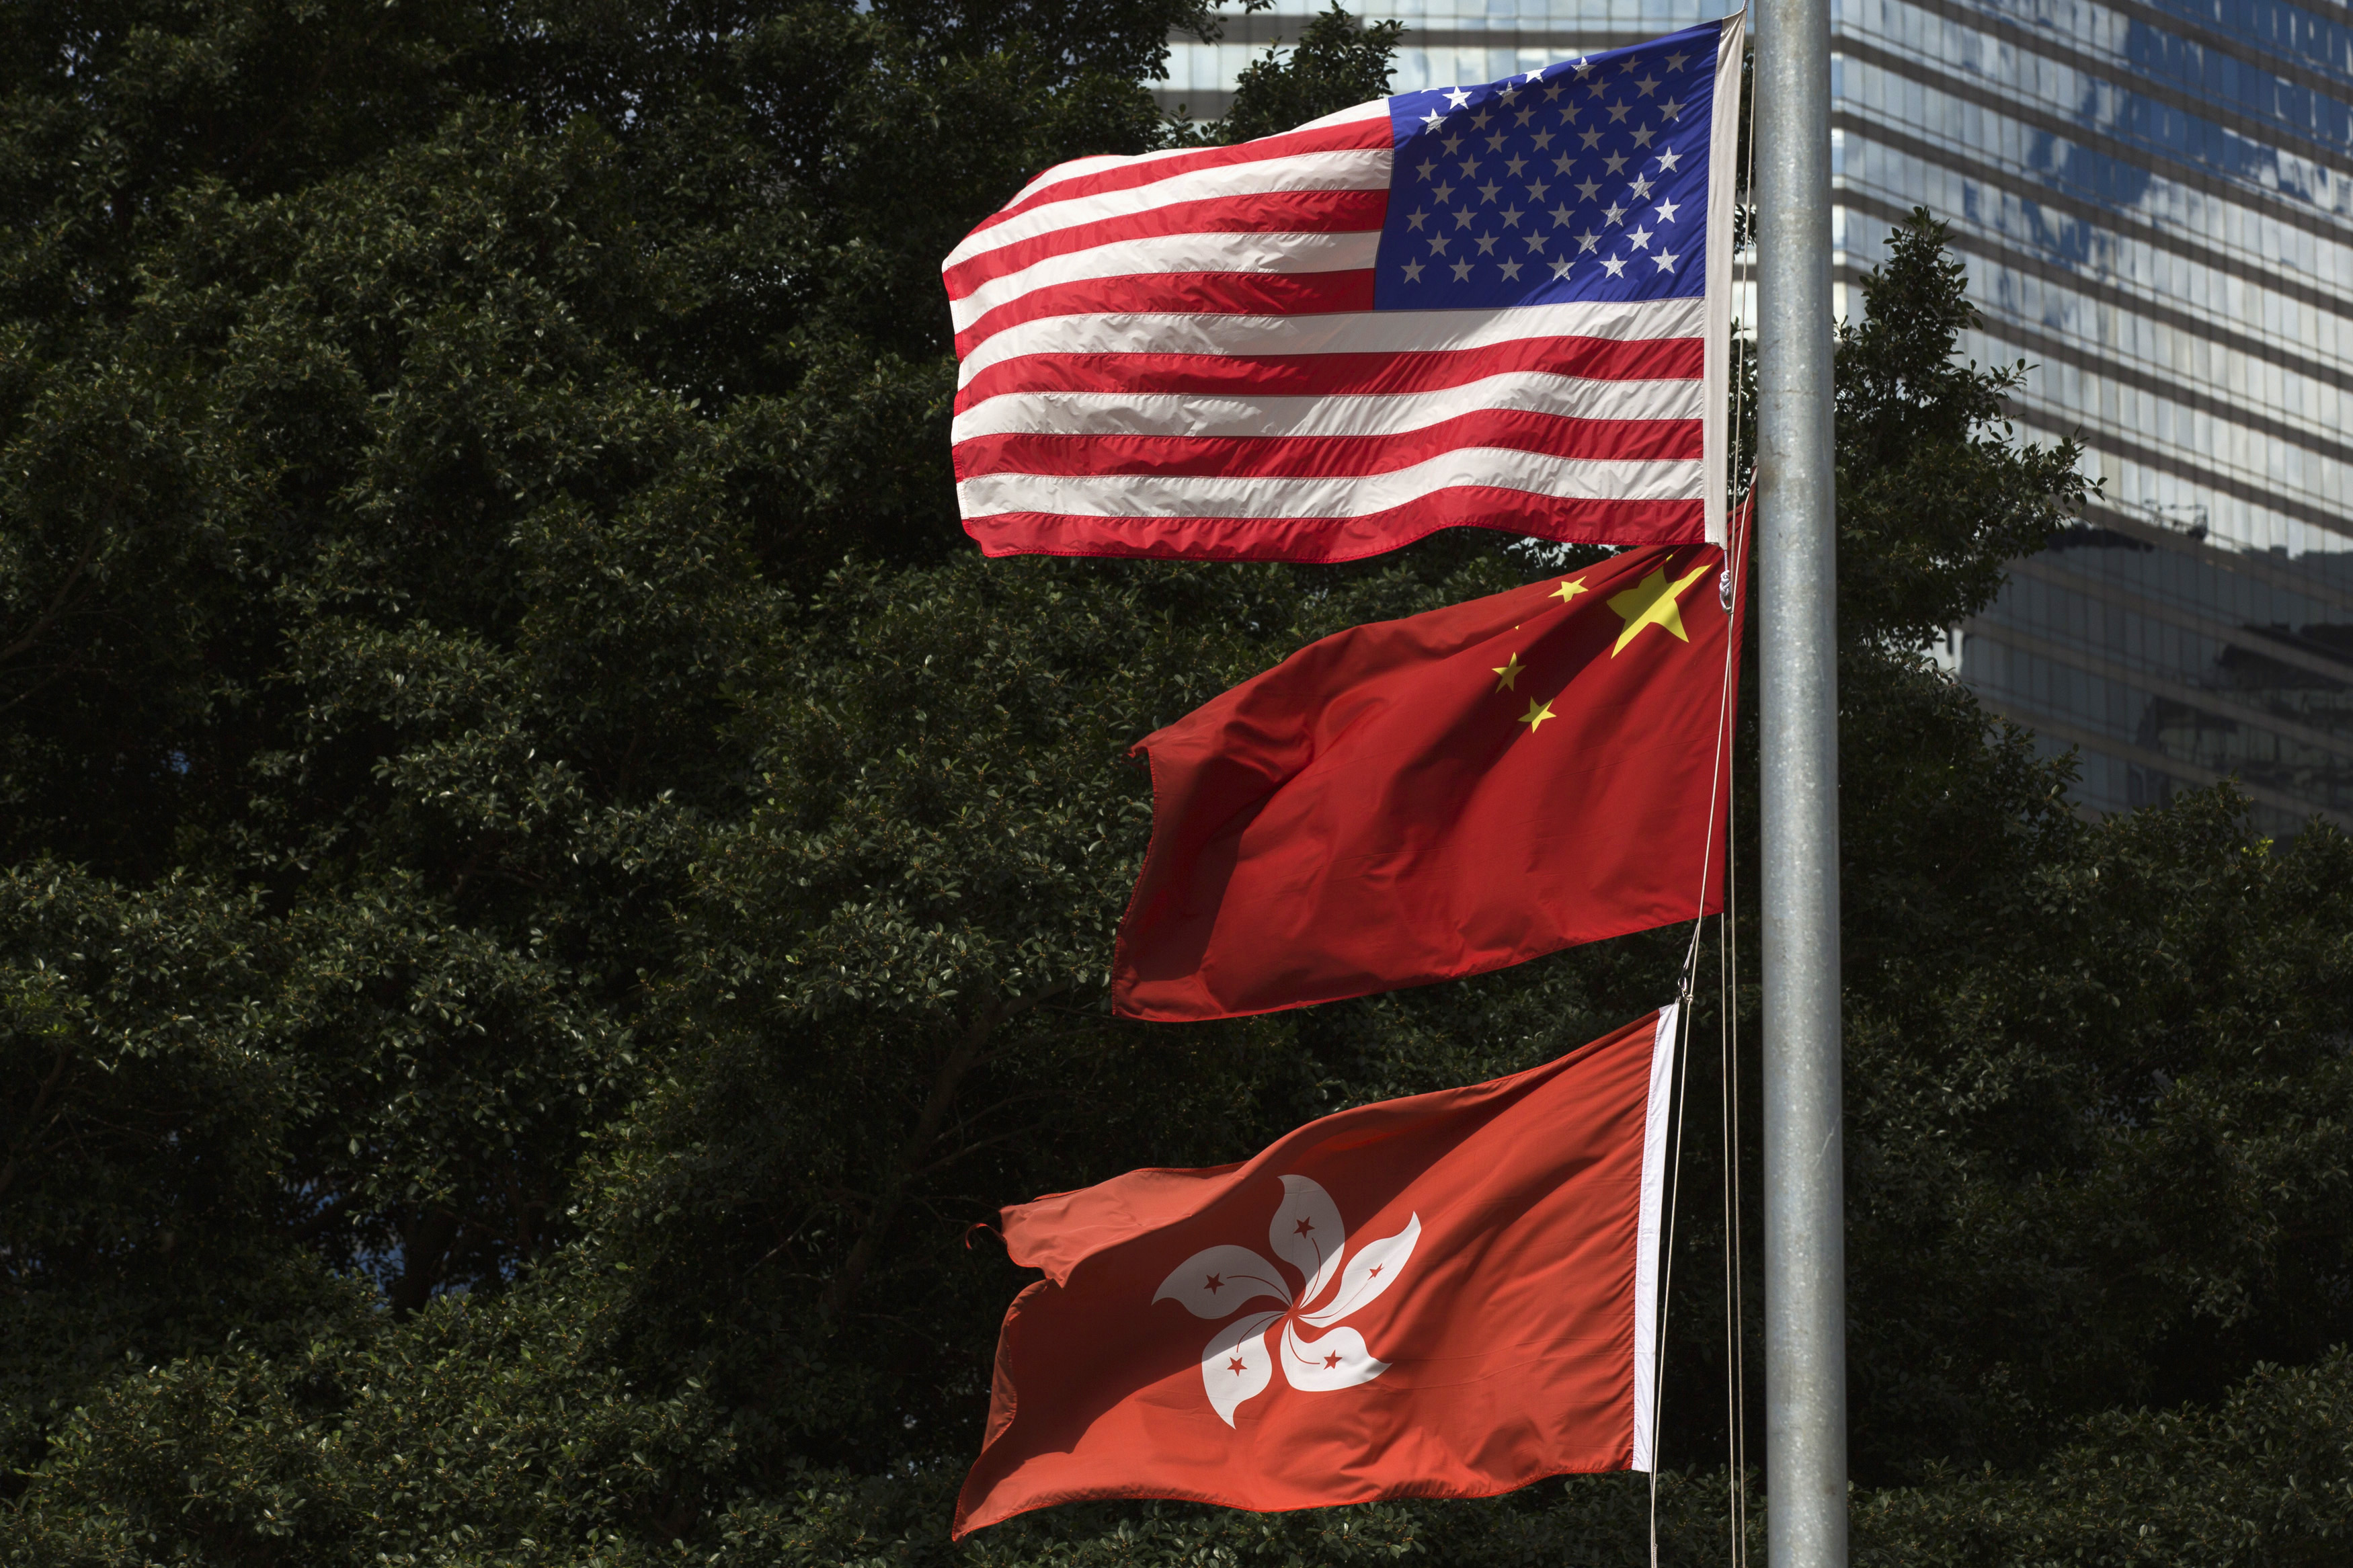 Flags of China, Hong Kong and the U.S. fly next to each other along Fenwick Pier, in Hong Kong